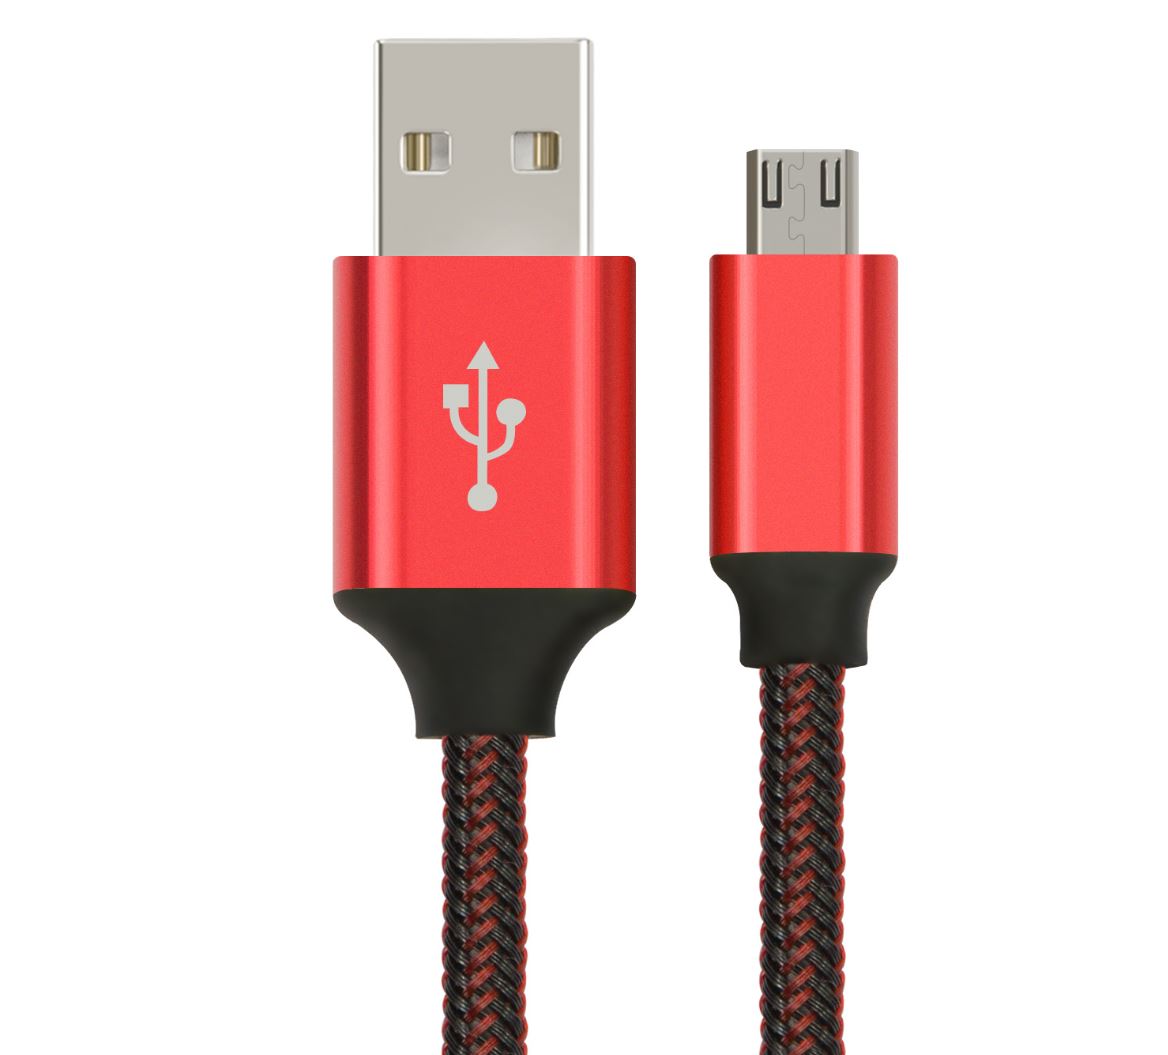 Astrotek 3m Micro USB Data Sync Charger Cable Cord Red Color for Samsung HTC Motorola Nokia Kndle Android Phone Tablet  Devices